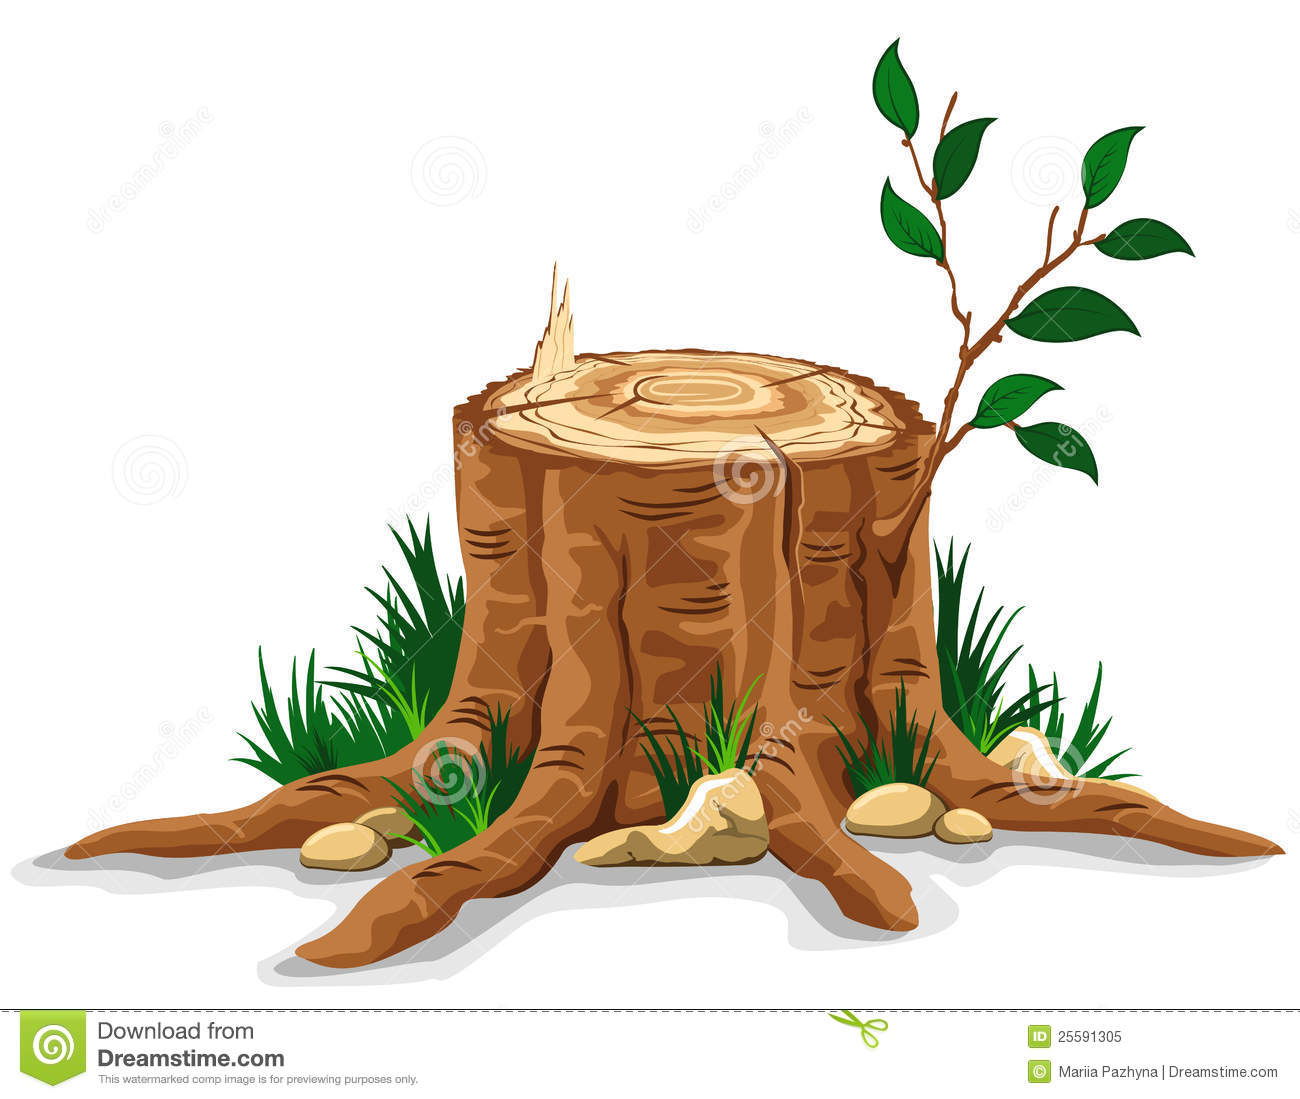 Young Branch On The Old Tree Stump  Detailed Vector Illustration